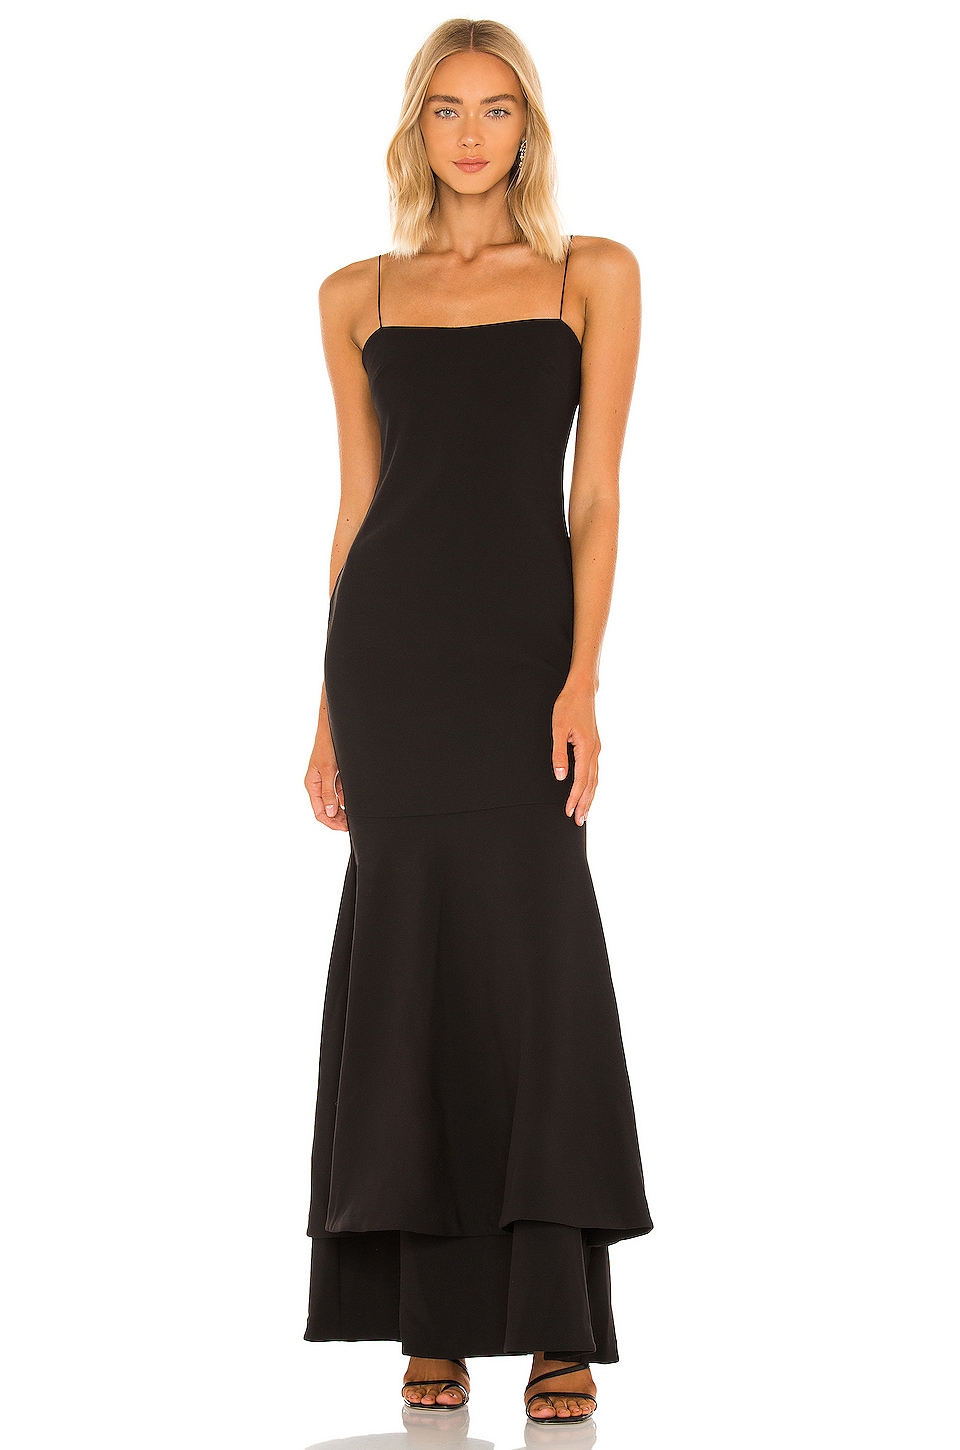 LIKELY Aurora Gown in Black | REVOLVE